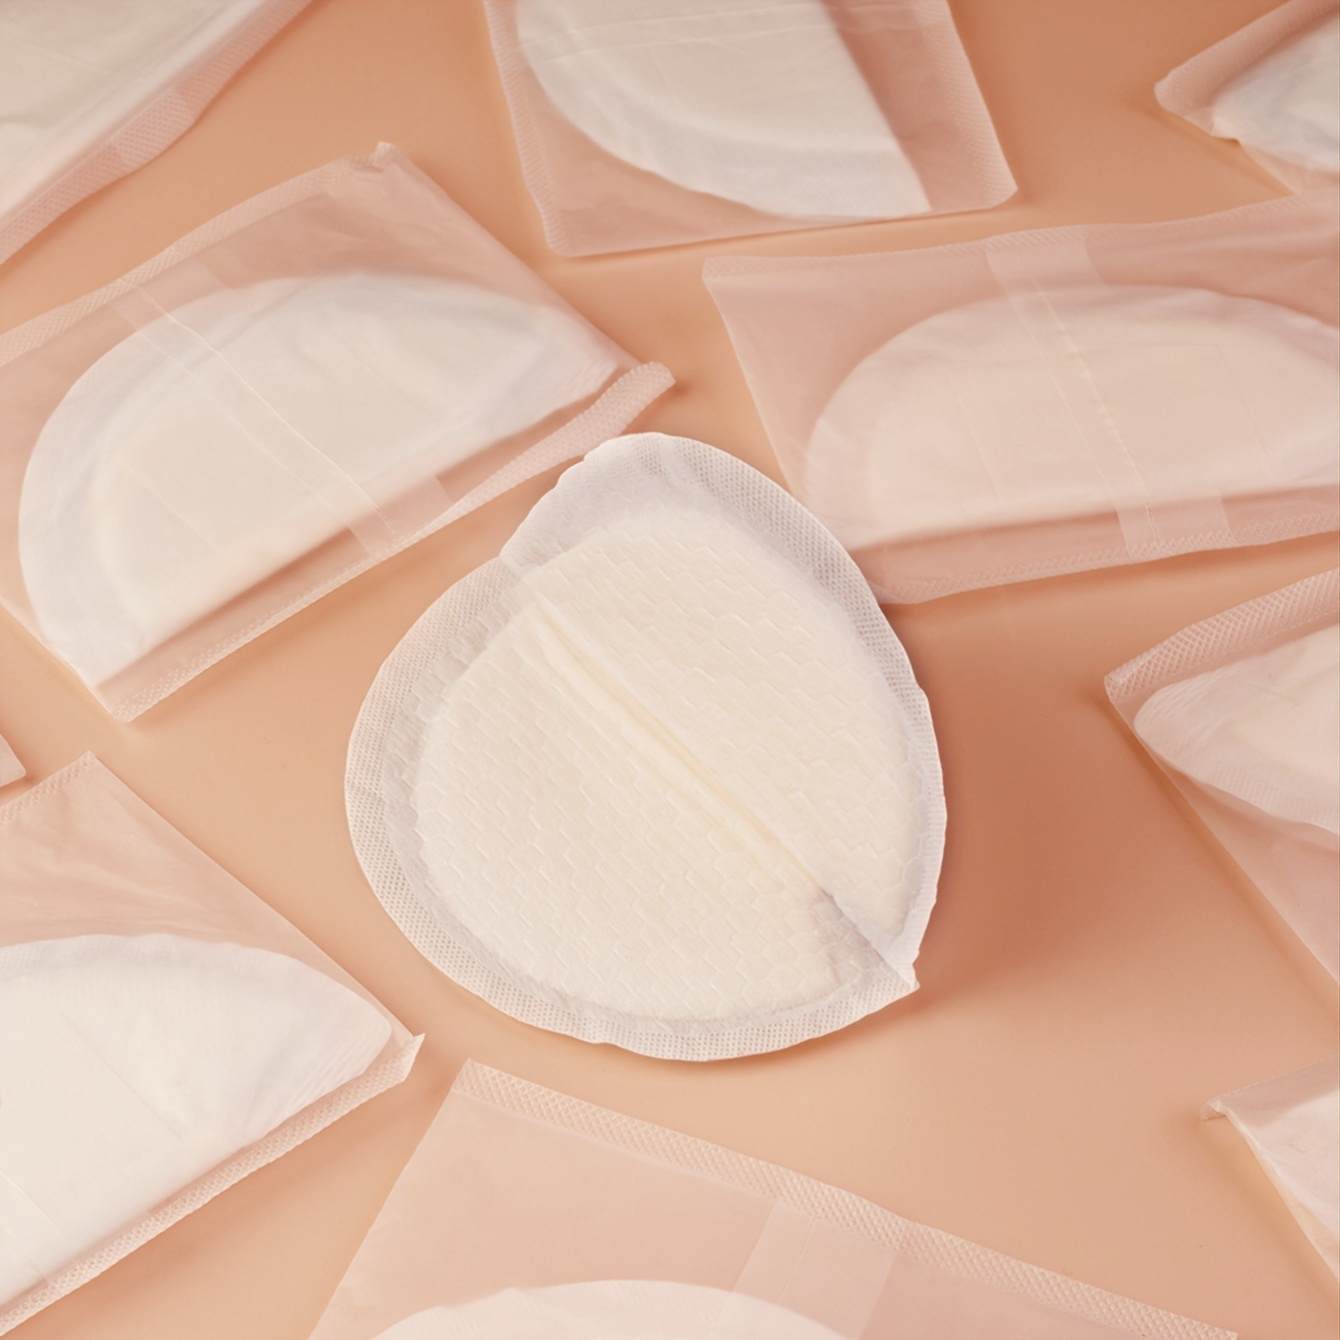 50Pcs Disposable Ultra Thin Nursing Breast Pads Absorbent